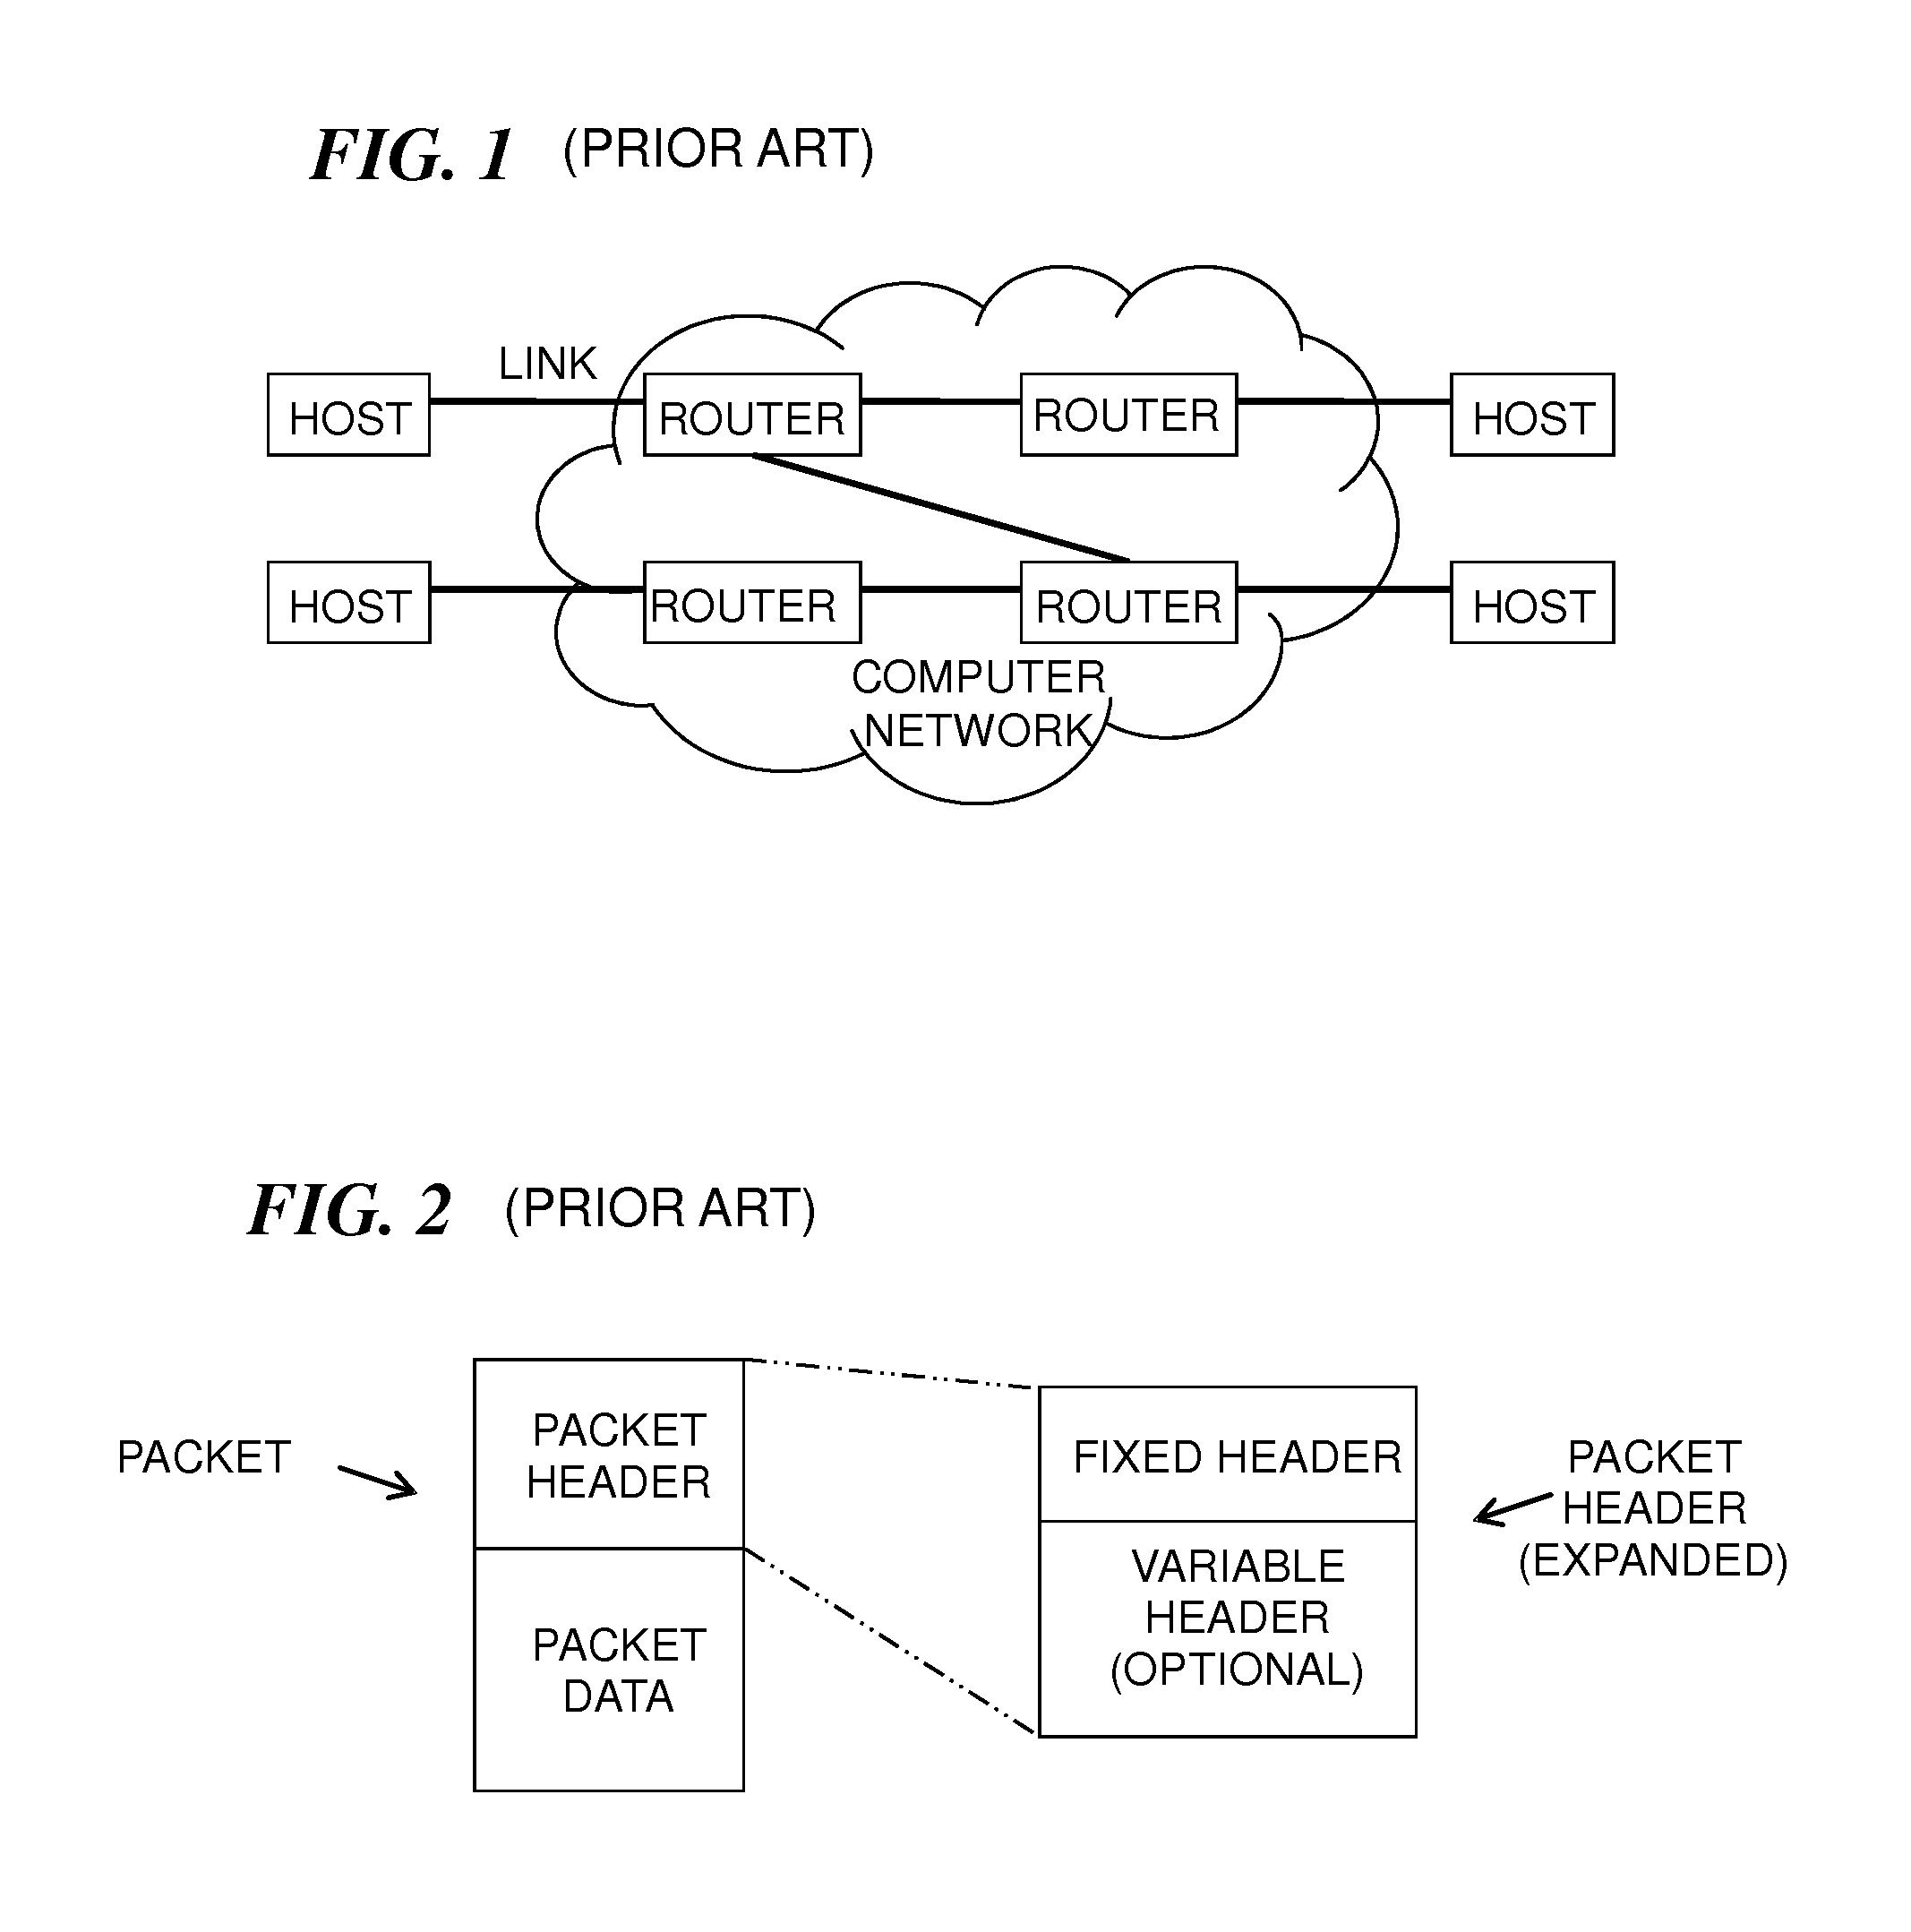 Apparatus and method for providing semantically aware network services